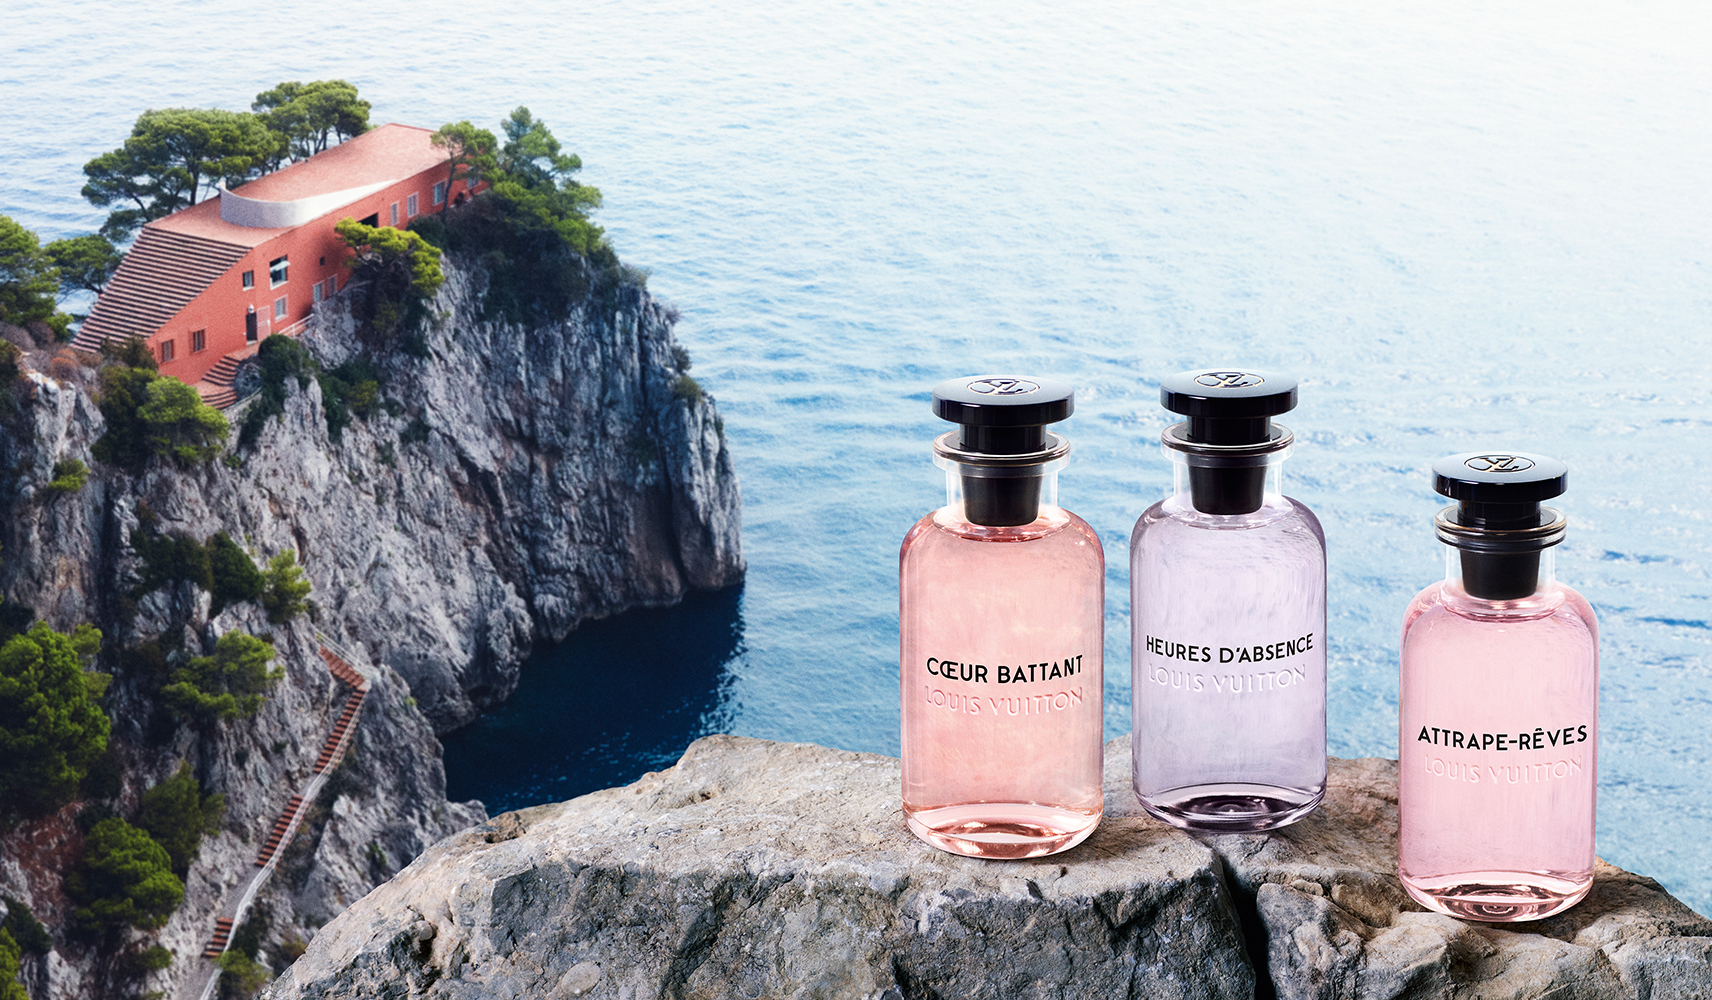 LOUIS VUITTON PRESENTS ITS NEW FEMININE FRAGRANCE « HEURES D'ABSENCE »